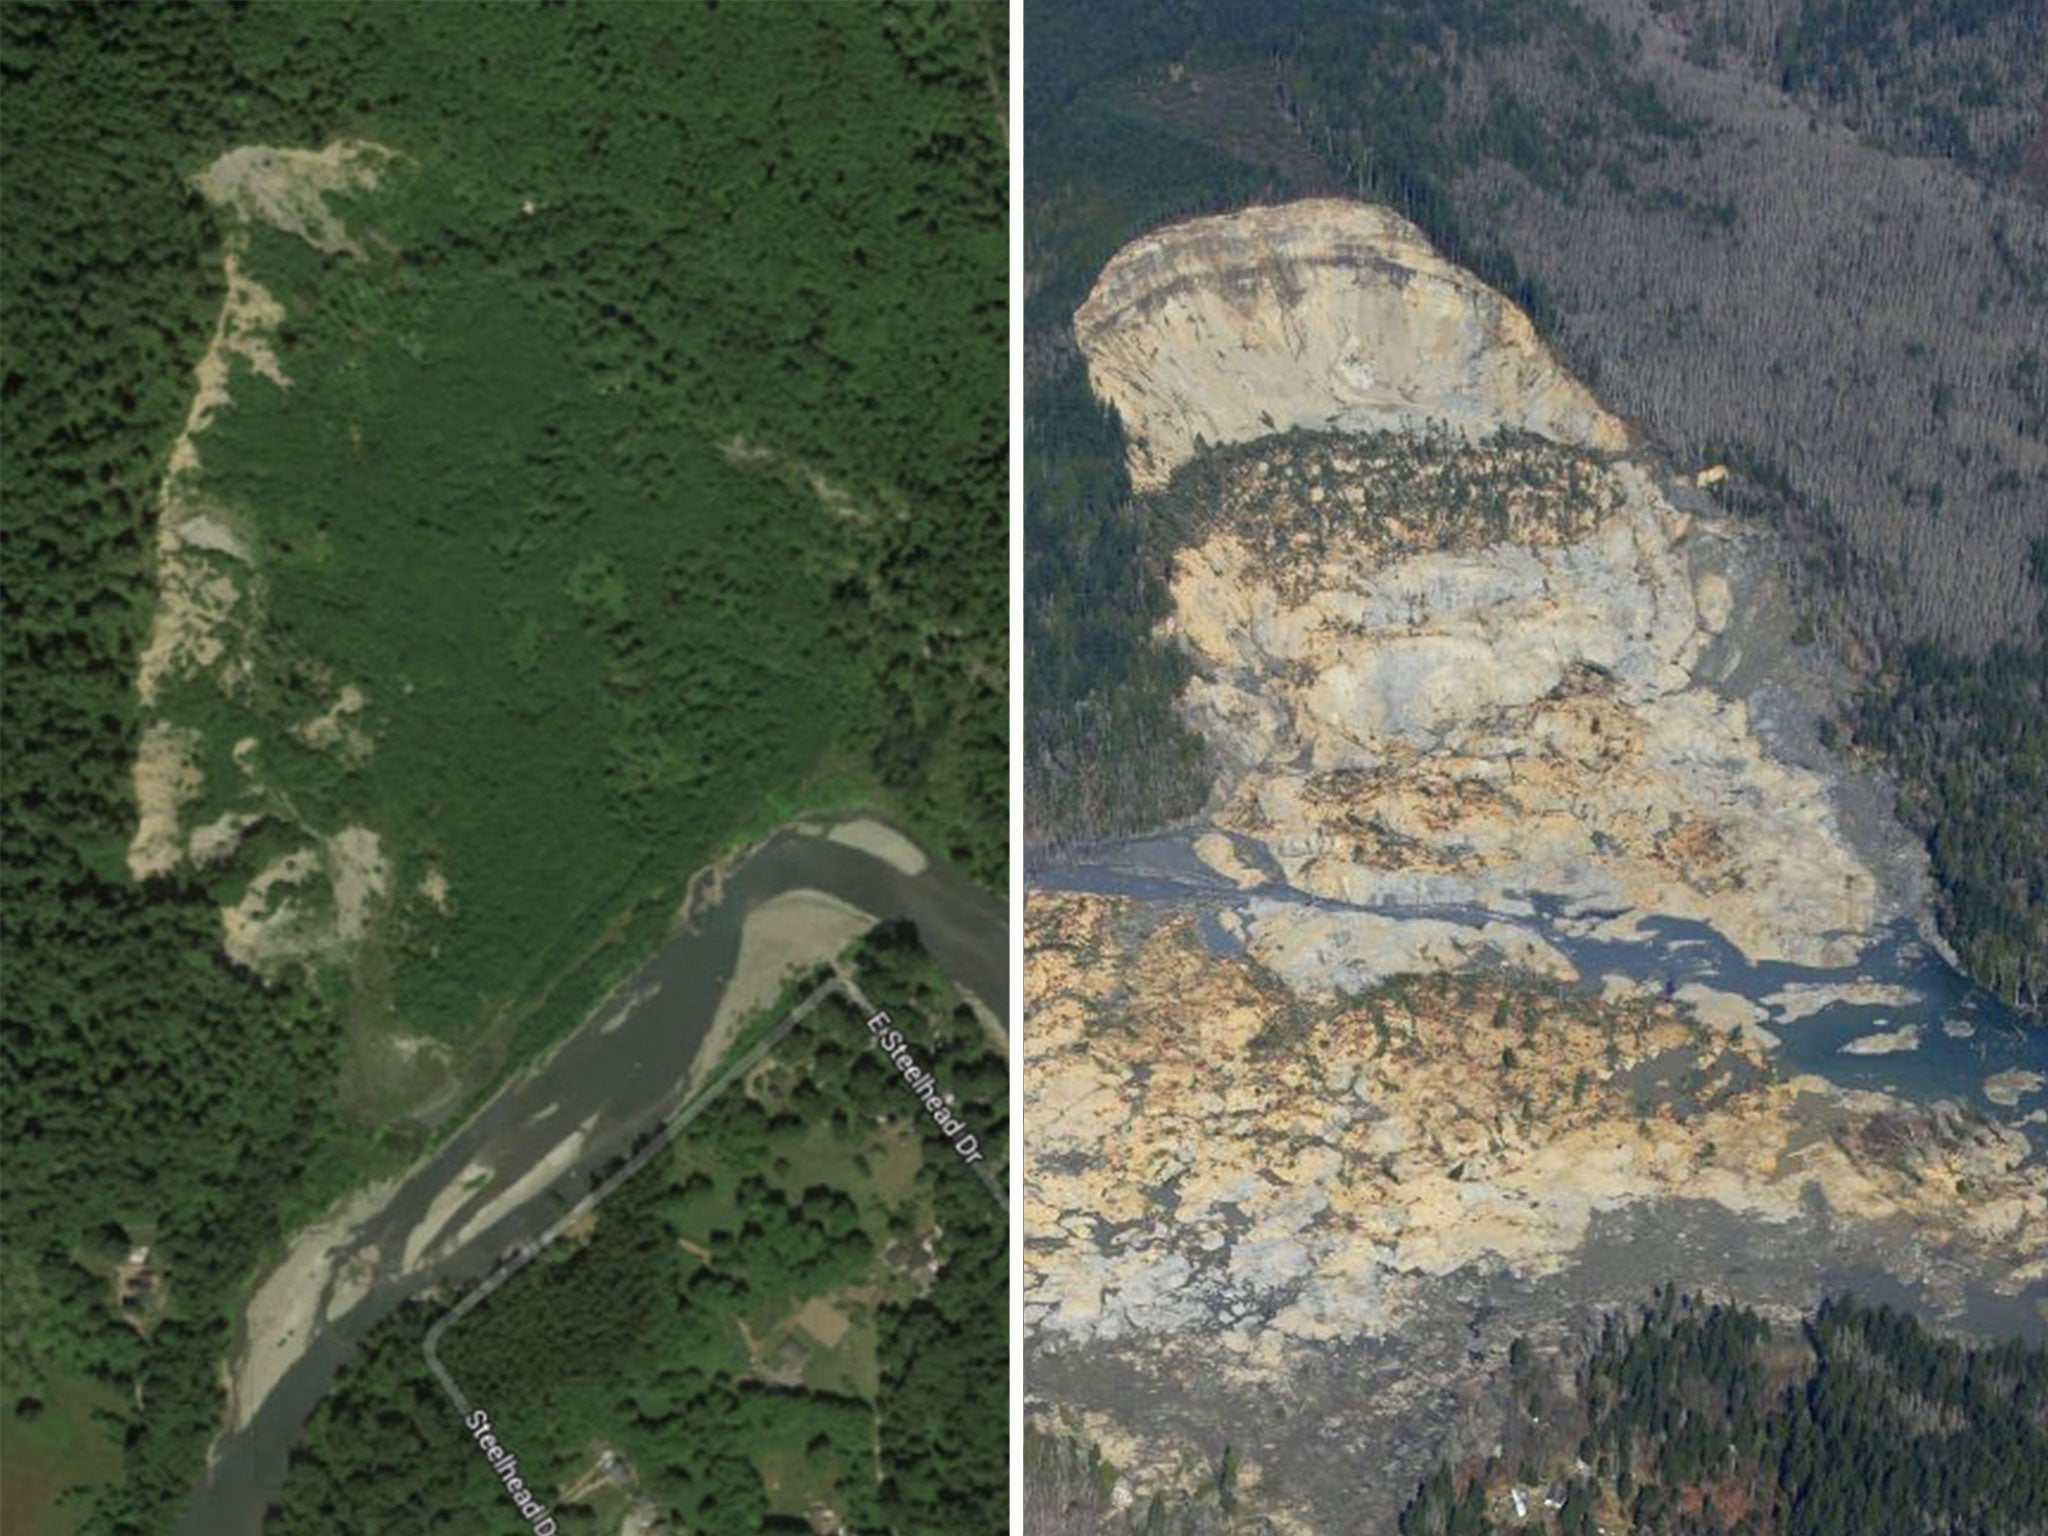 Incredible before and after pictures showing the devastation of the landslide in Washington state